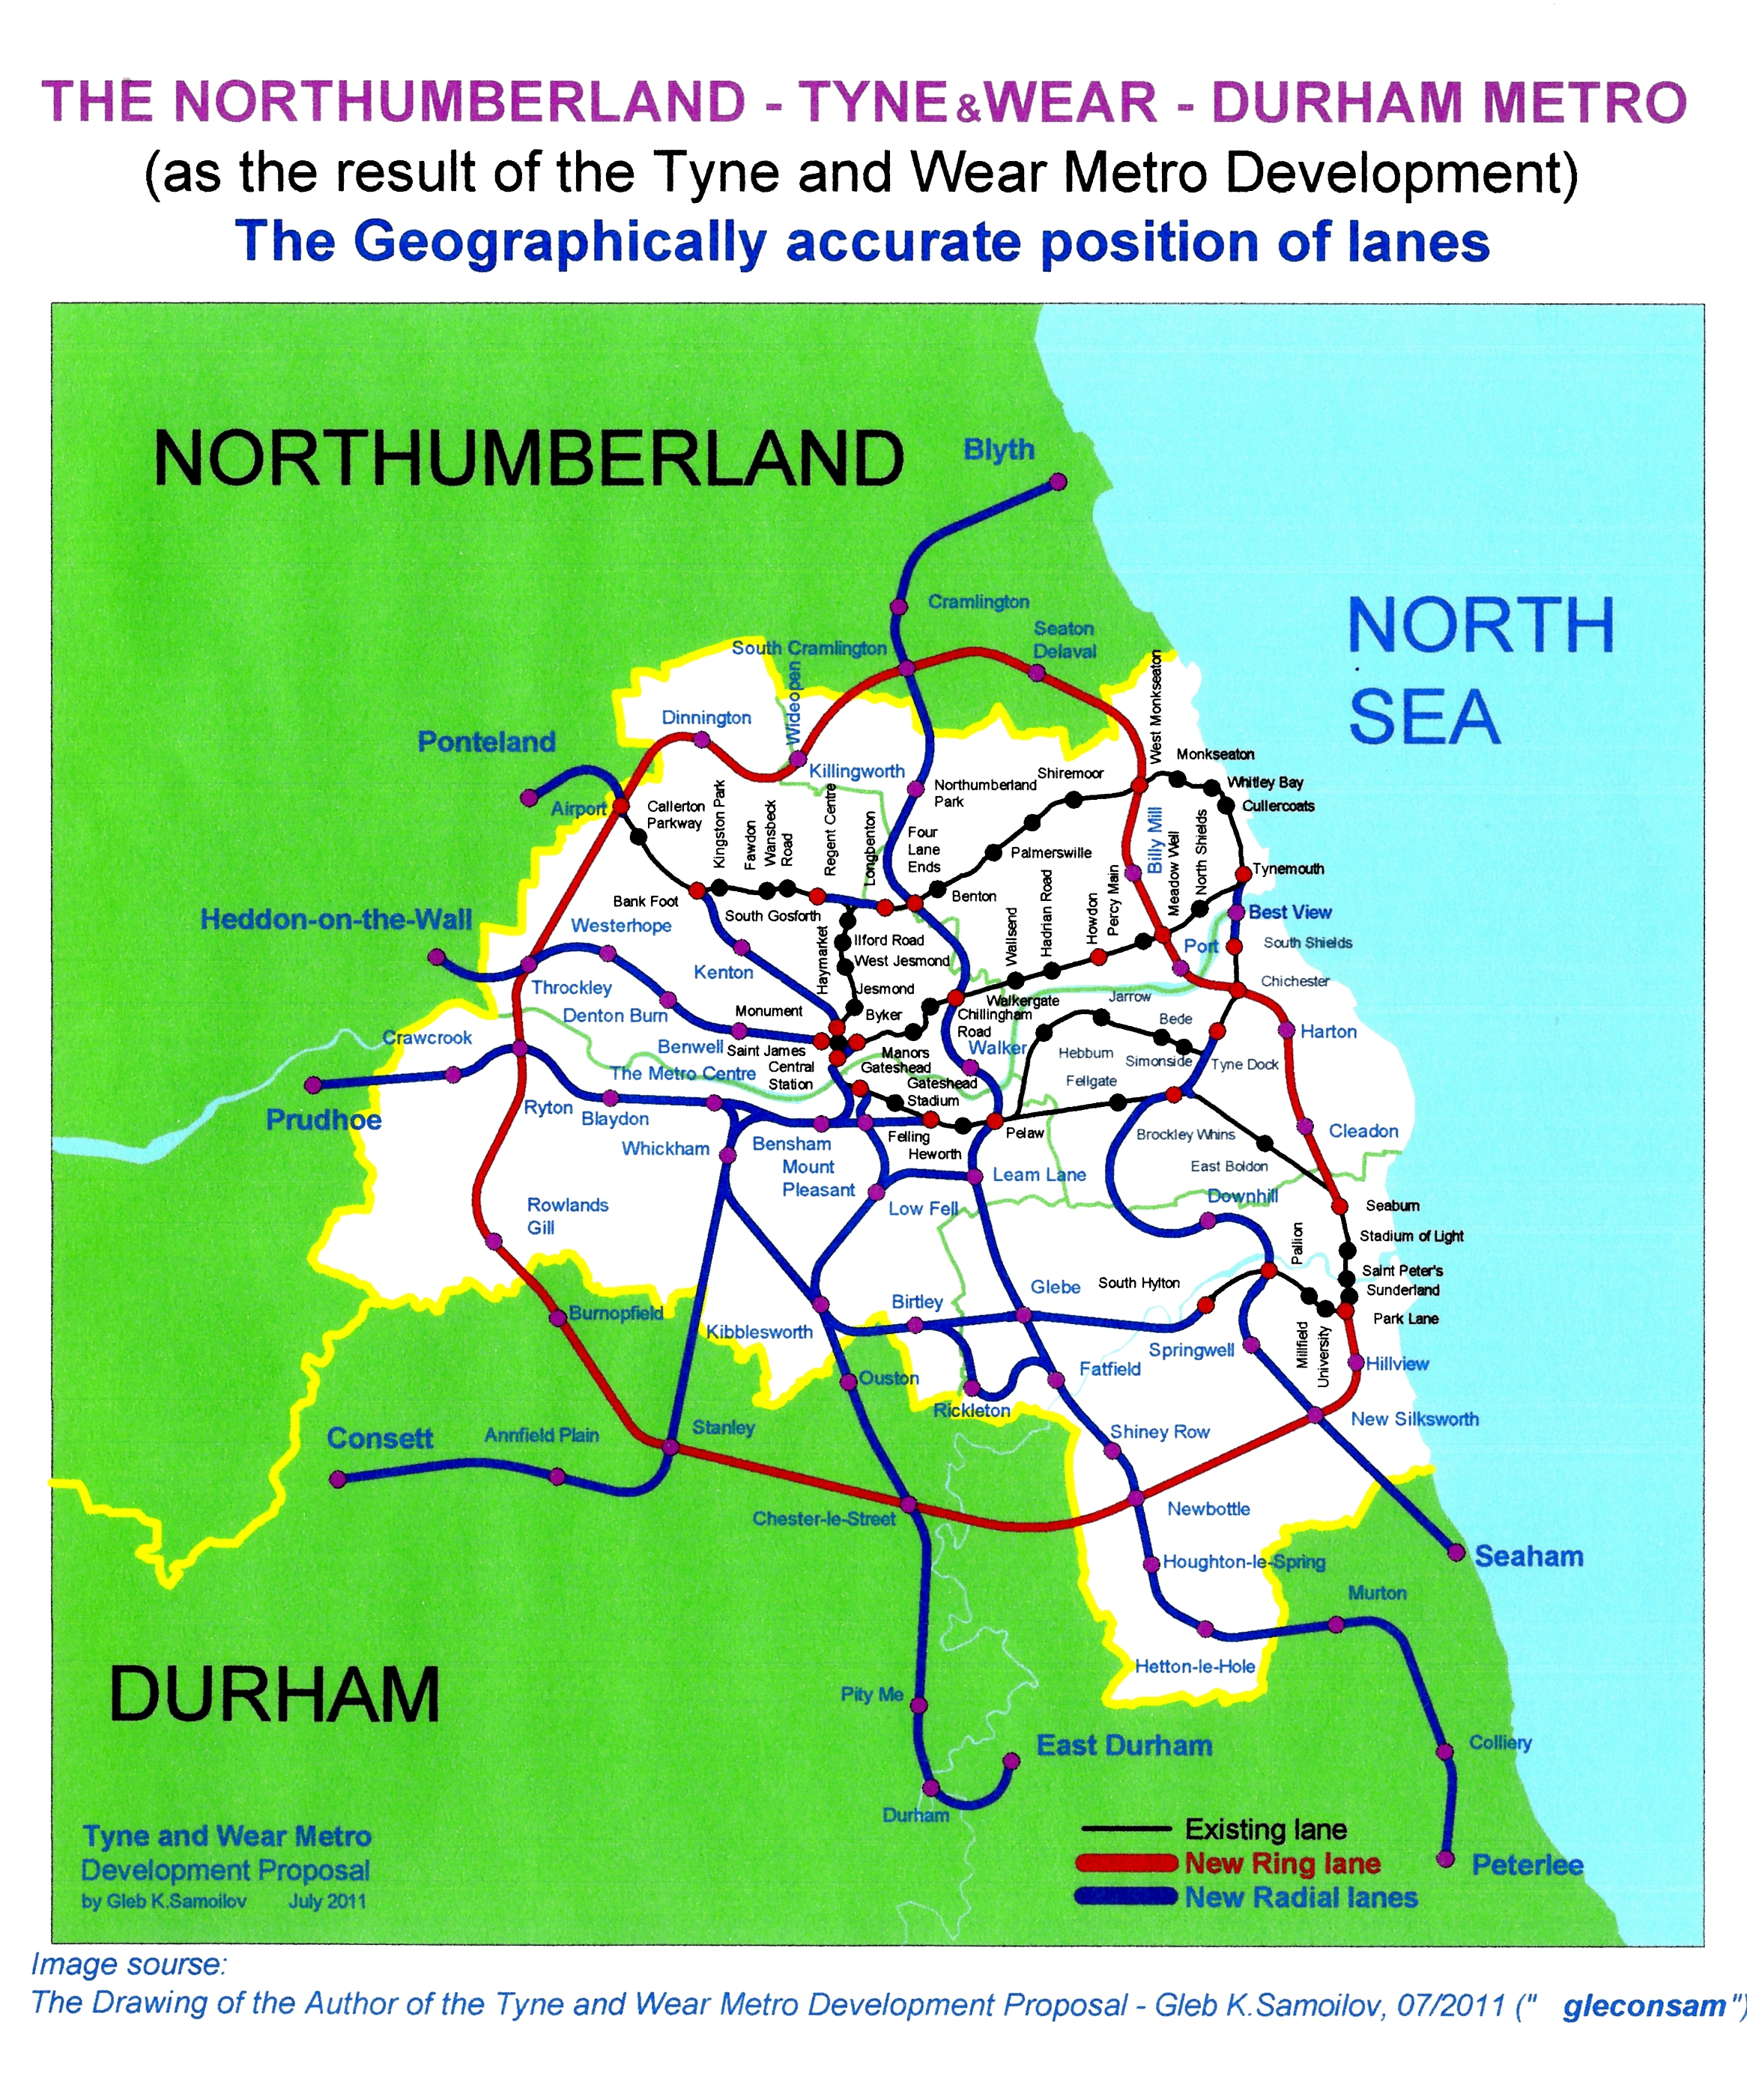 The Geographically accurate position of NORTHUMBERLAND - TYNE and WEAR  - DURHAM METRO lanes